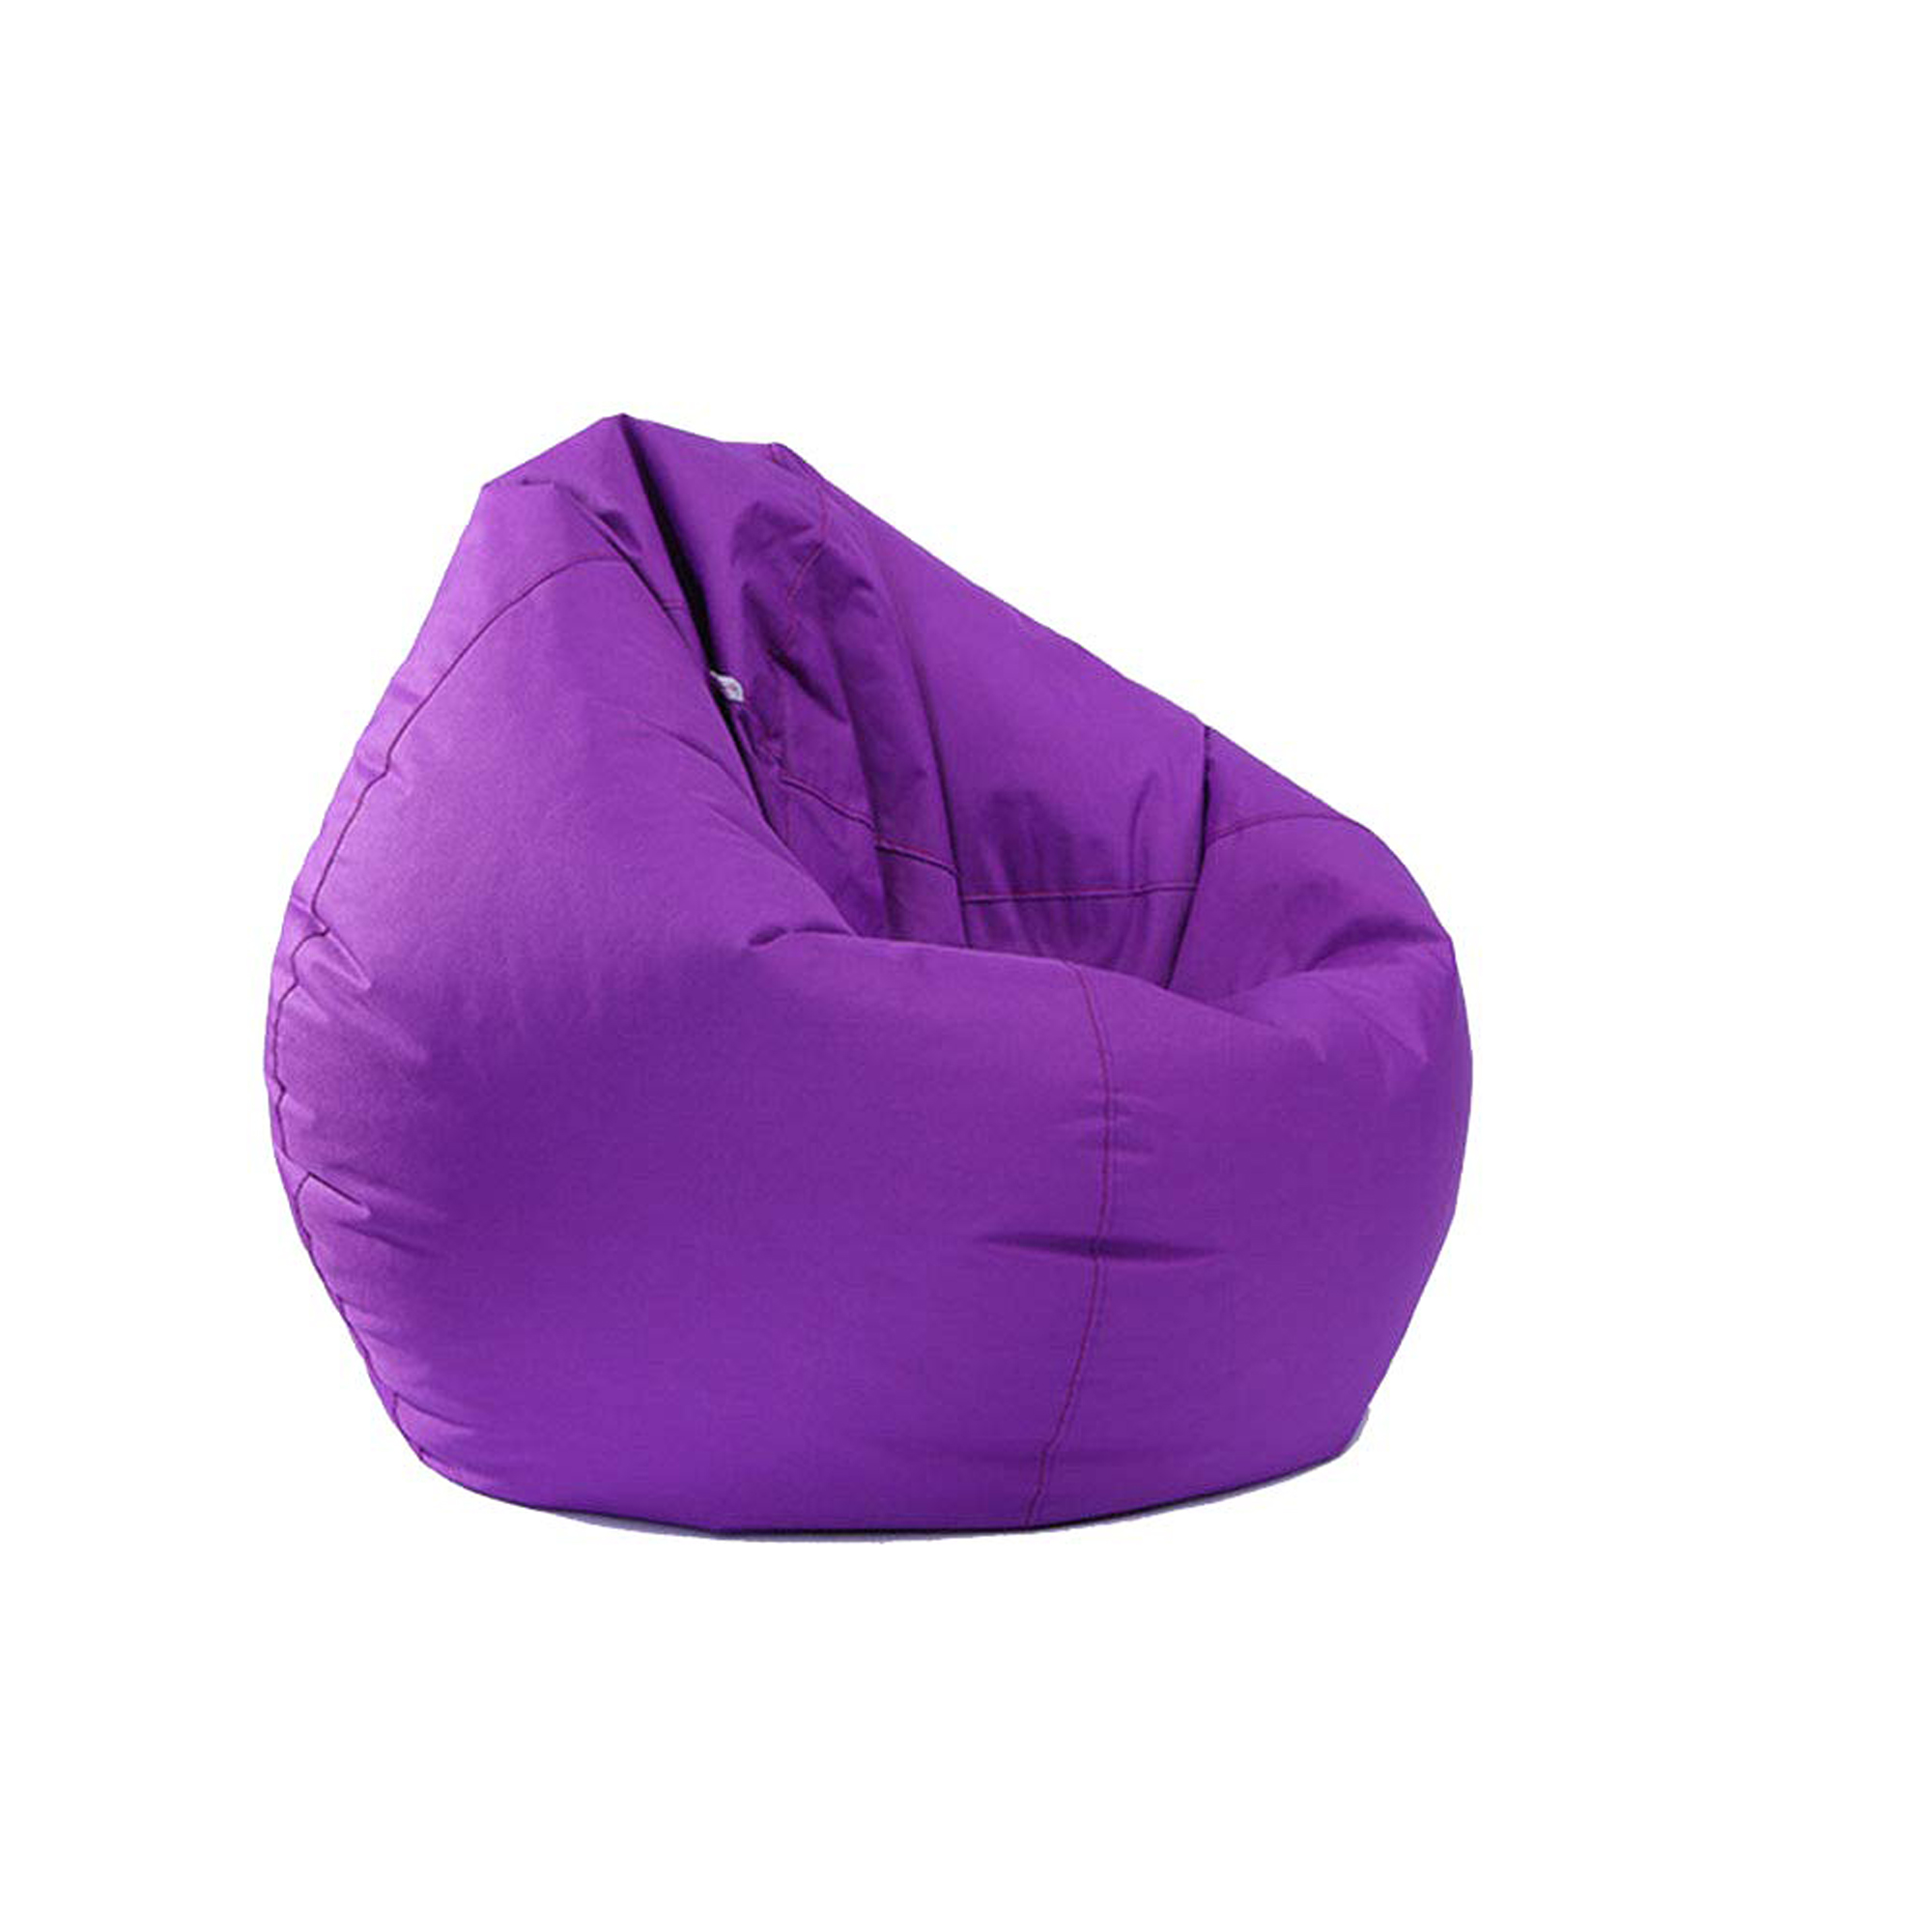 Lounge Bean Bag Home Soft Lazy Sofa Cozy Single Chair Durable Furniture Only Covers - image 1 of 5